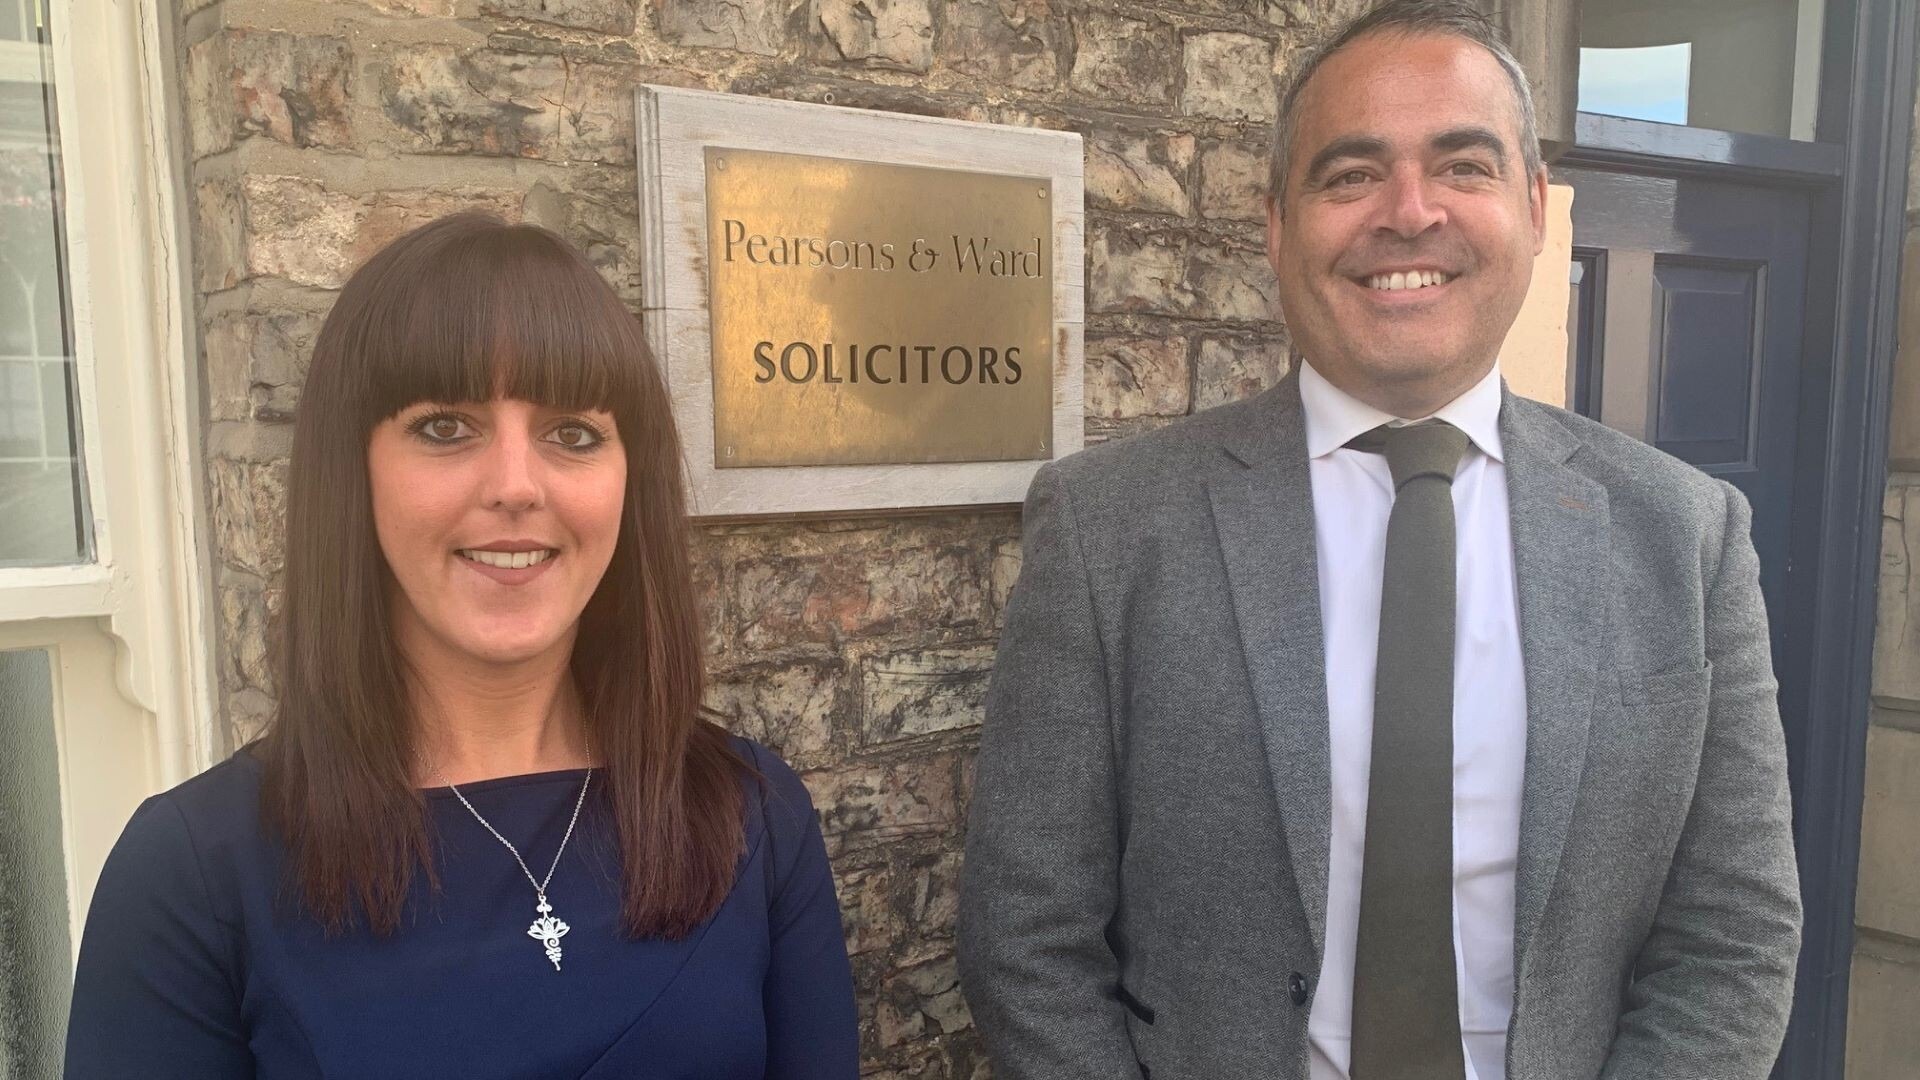 Pearsons & Ward Solicitors is delighted to welcome Conveyancing Executive Catherine Thompson to its growing Residential Property Team in Malton.